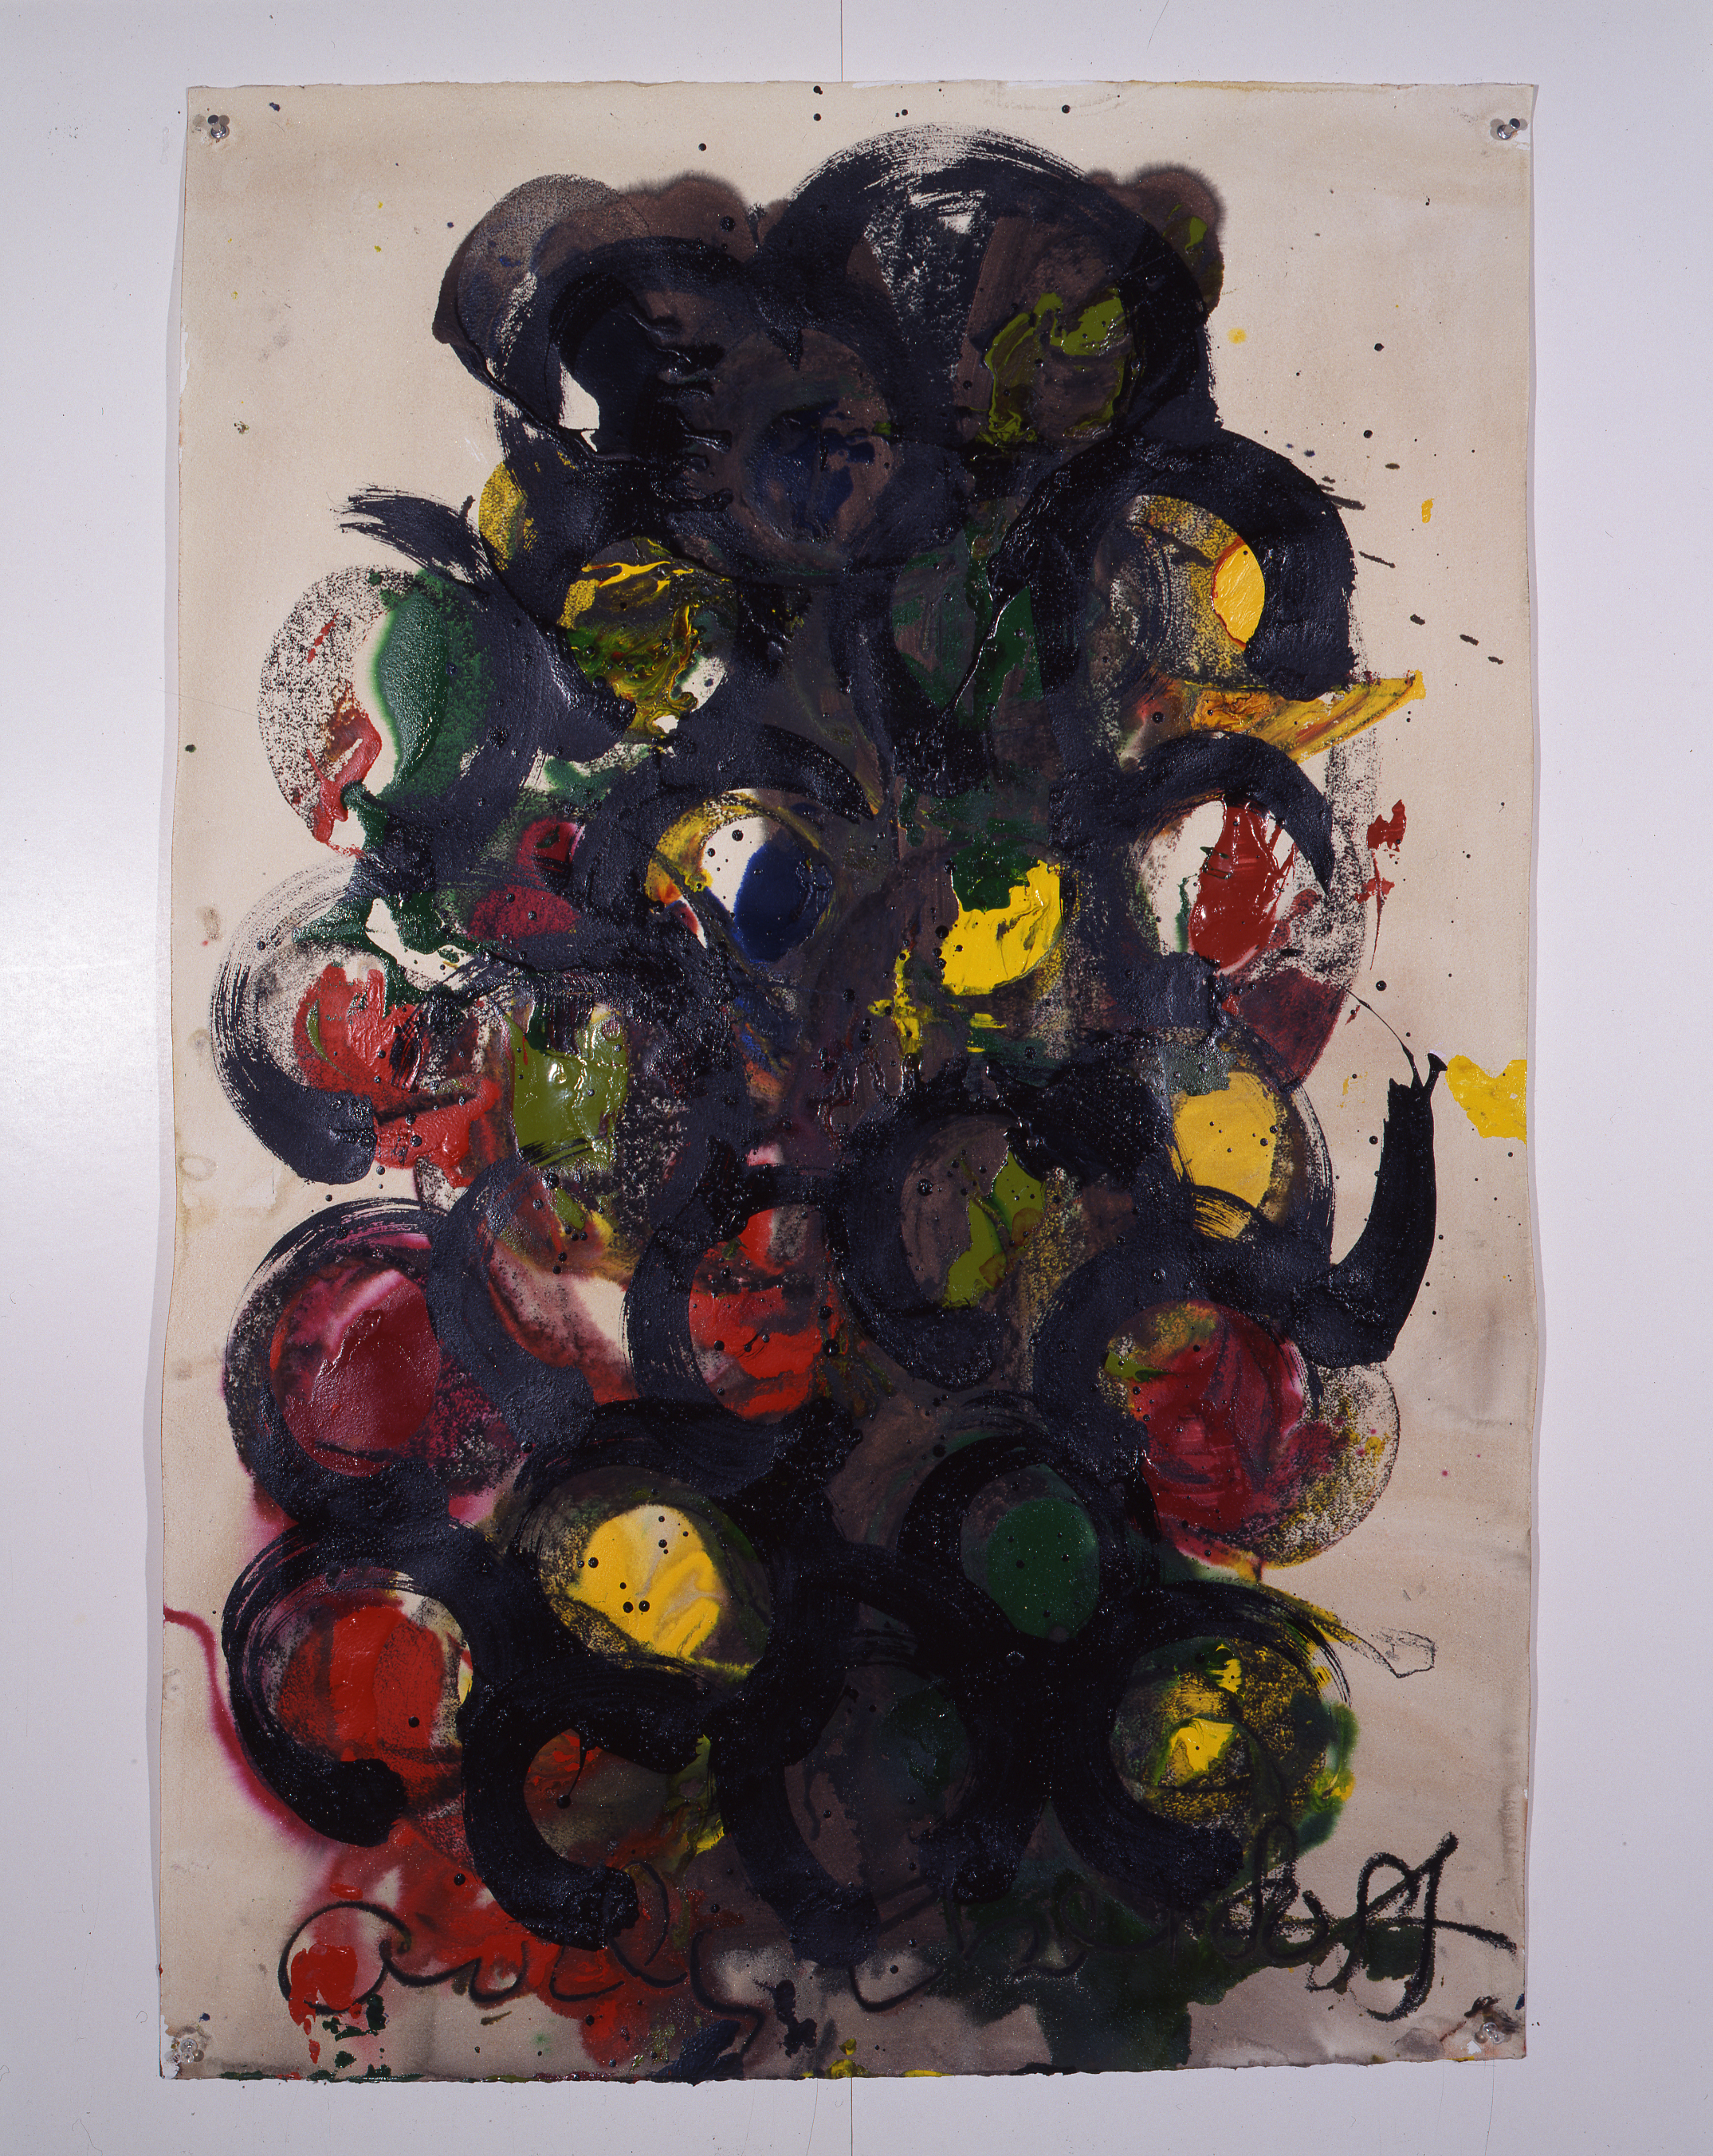  Dale Chihuly,&nbsp; Ebeltoft Drawing,&nbsp; (1991, mixed media on paper, 45 x 30 inches), DC.354 